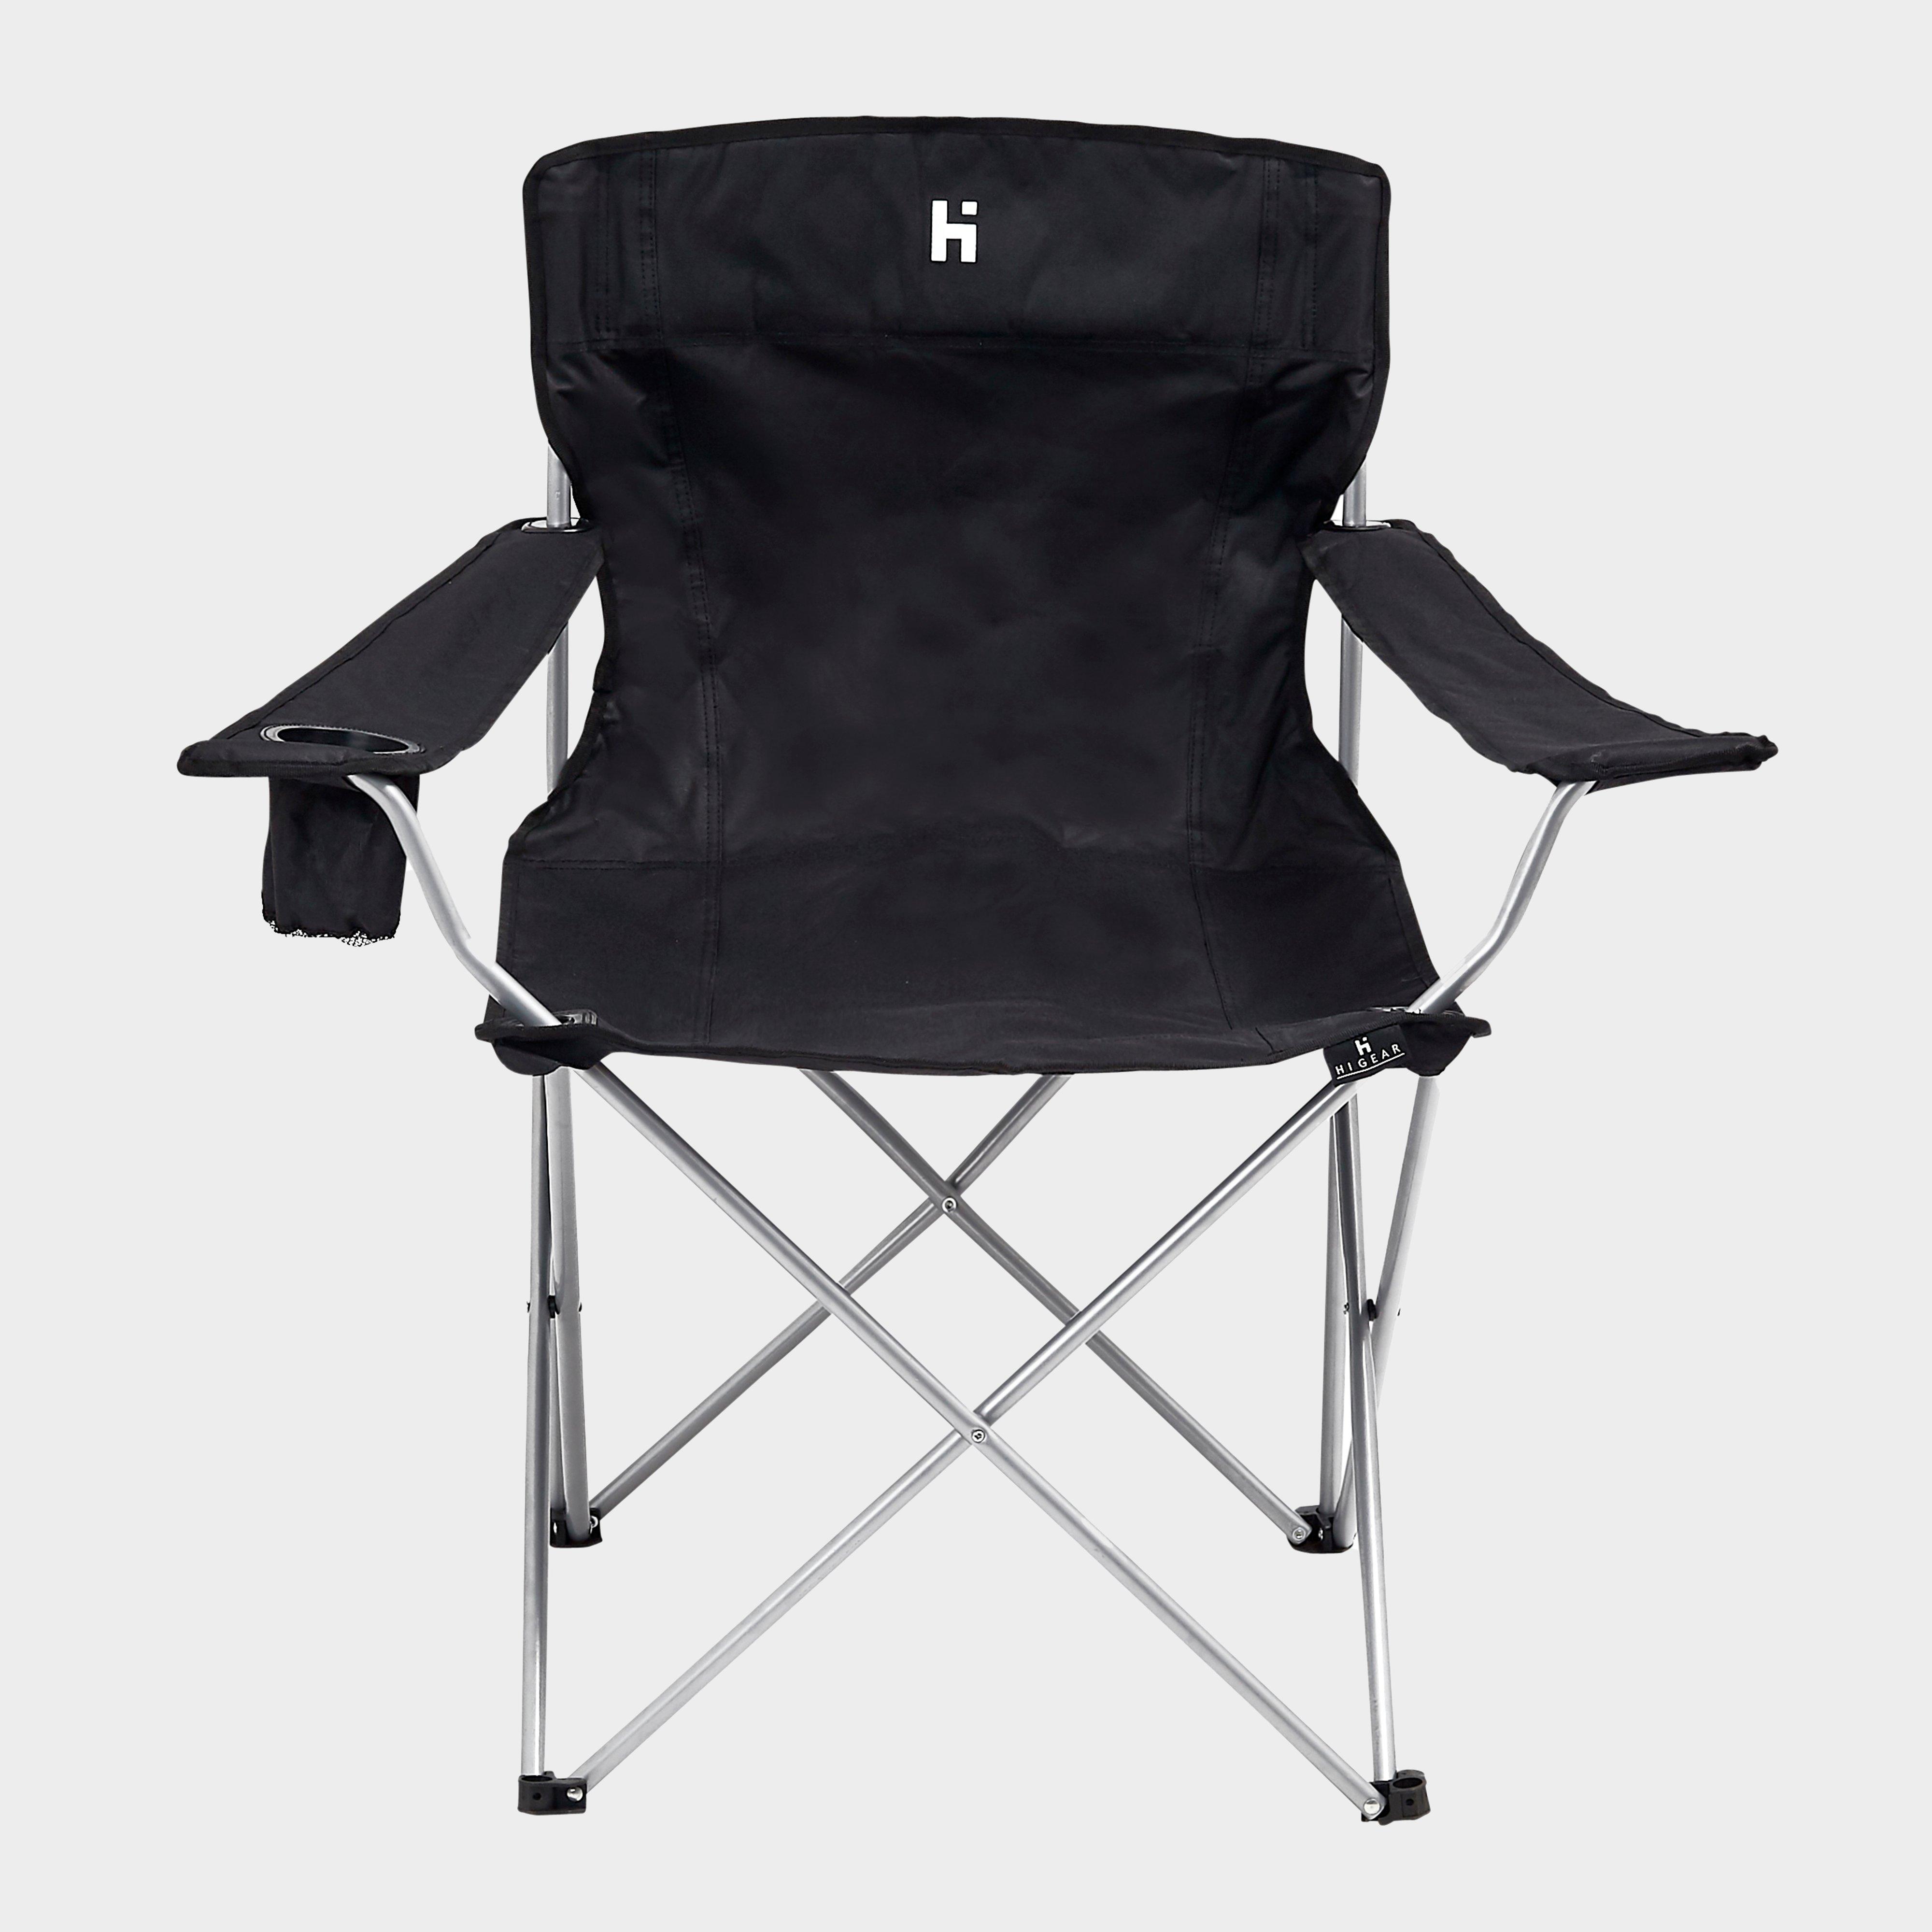 Hi-Gear Maine Camping Chair Review